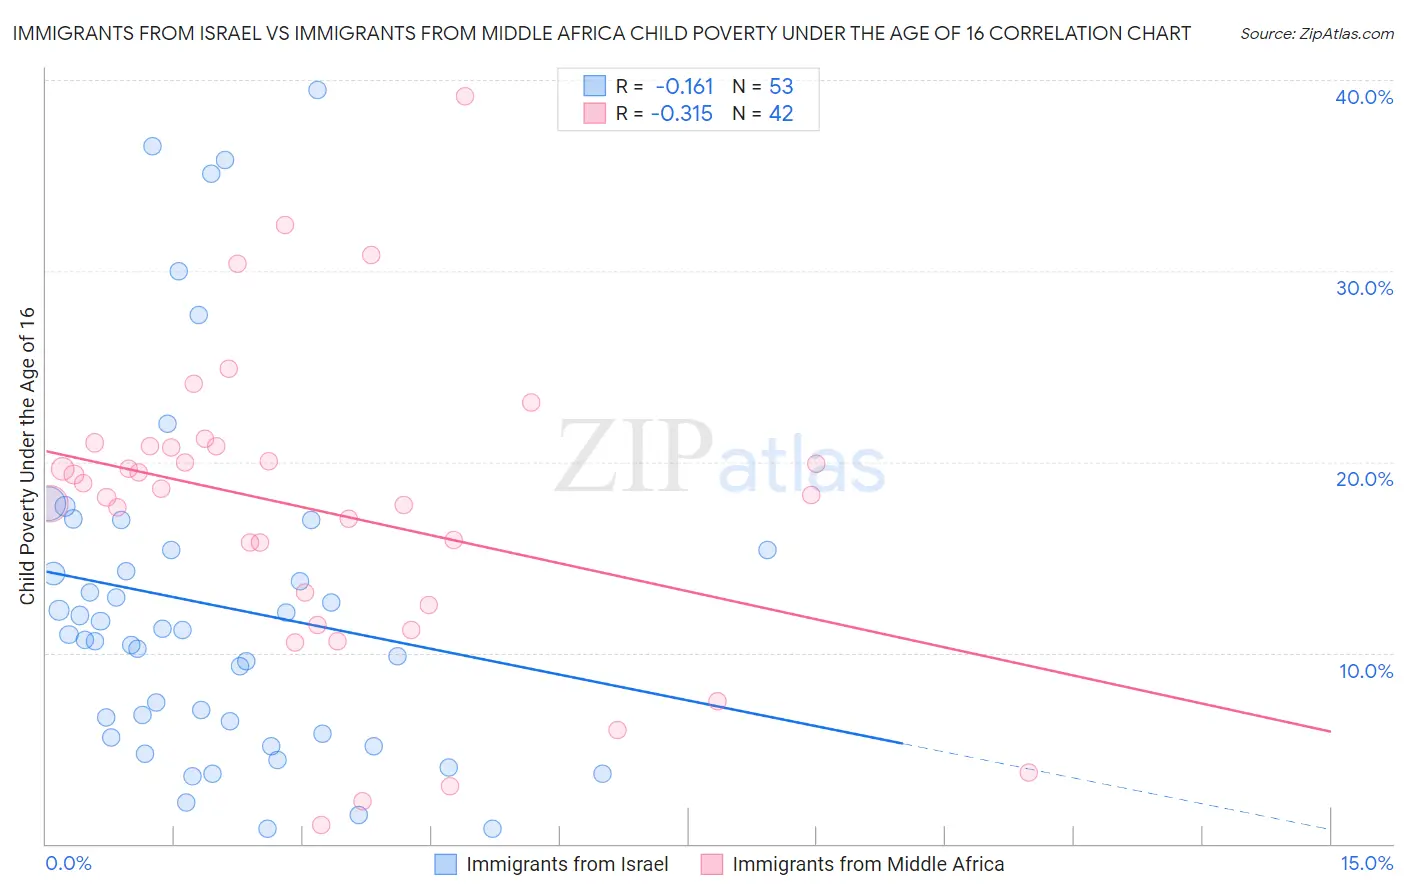 Immigrants from Israel vs Immigrants from Middle Africa Child Poverty Under the Age of 16